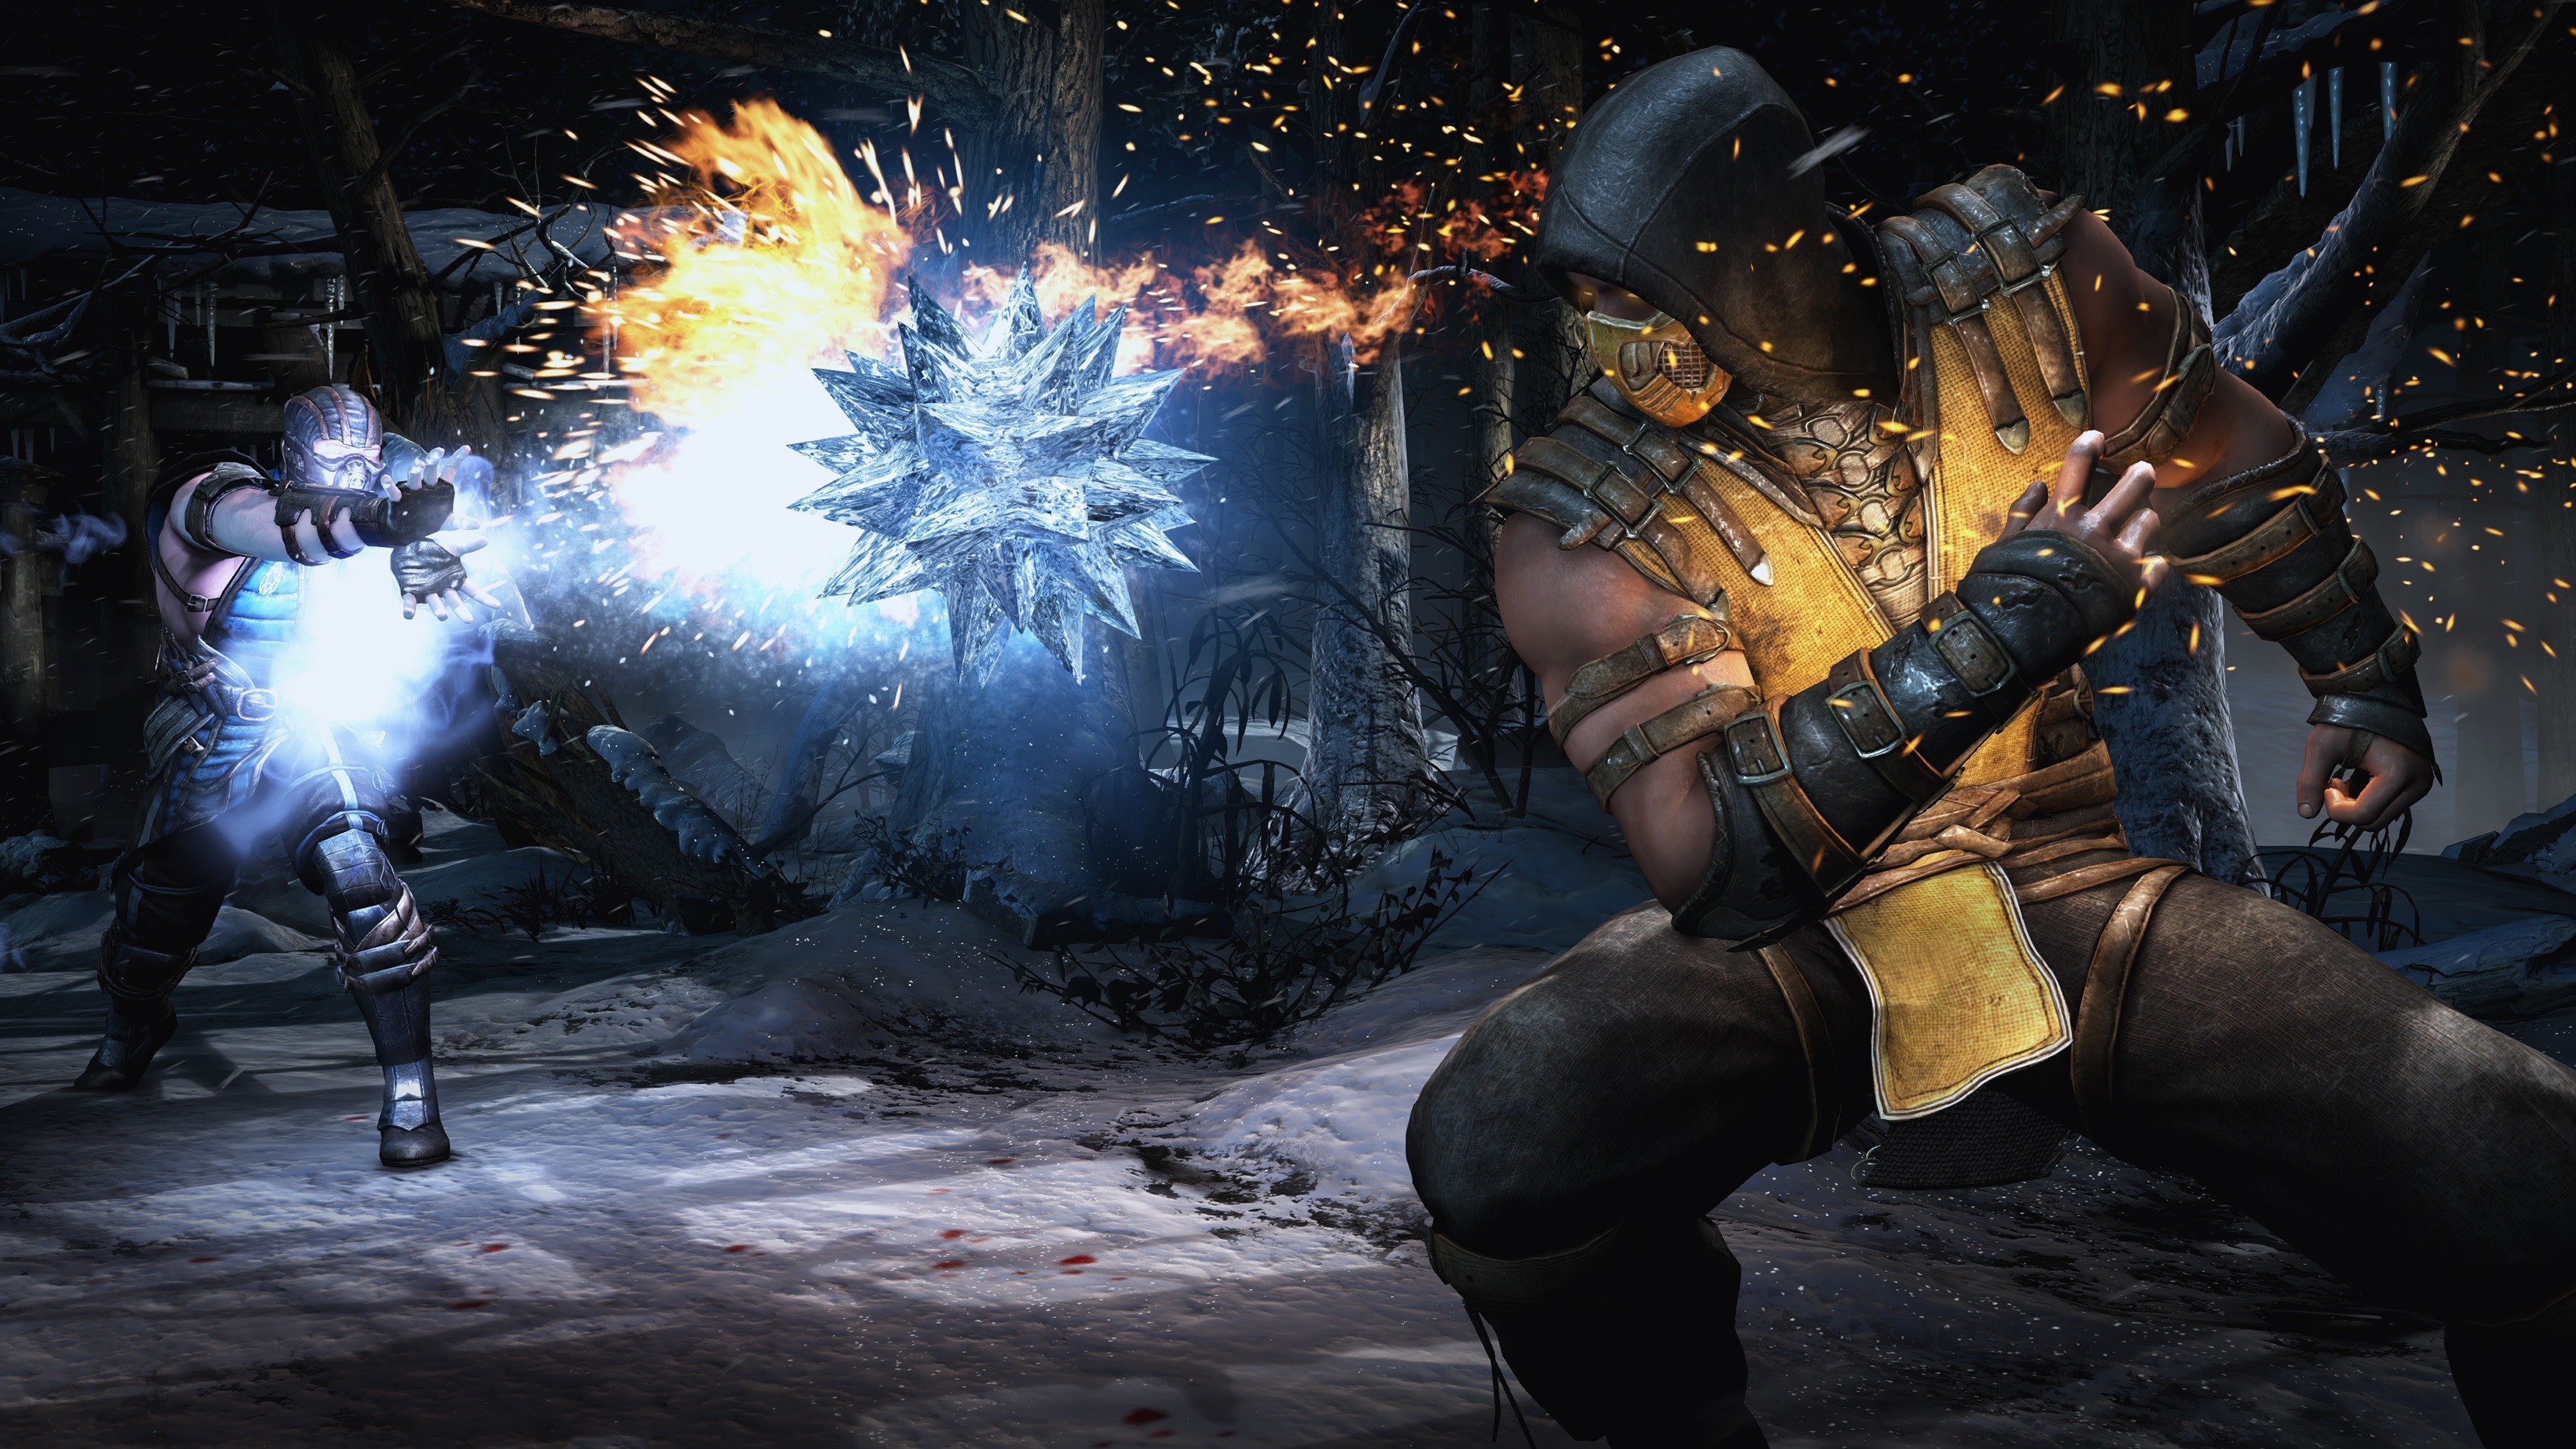 Cool Pictures of Scorpion from Mortal Kombat - HD 